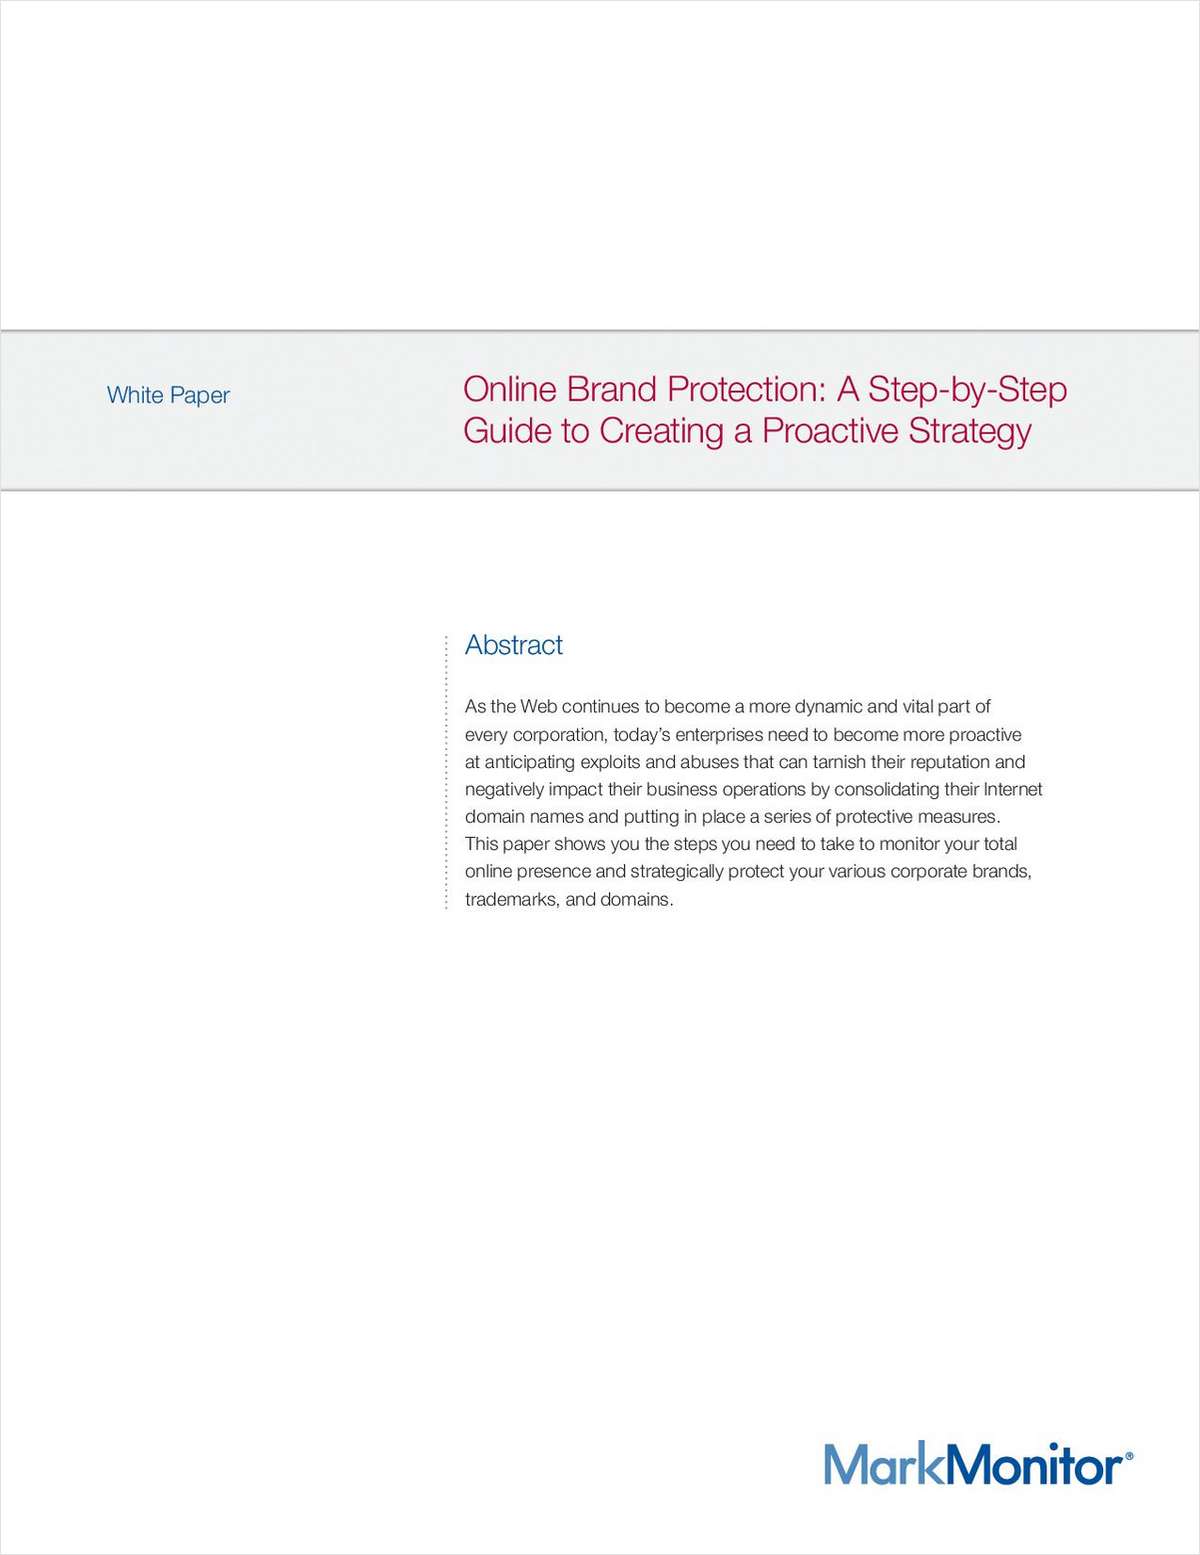 Online Brand Protection Guide: Key Steps for Protecting Your Brand and Domains